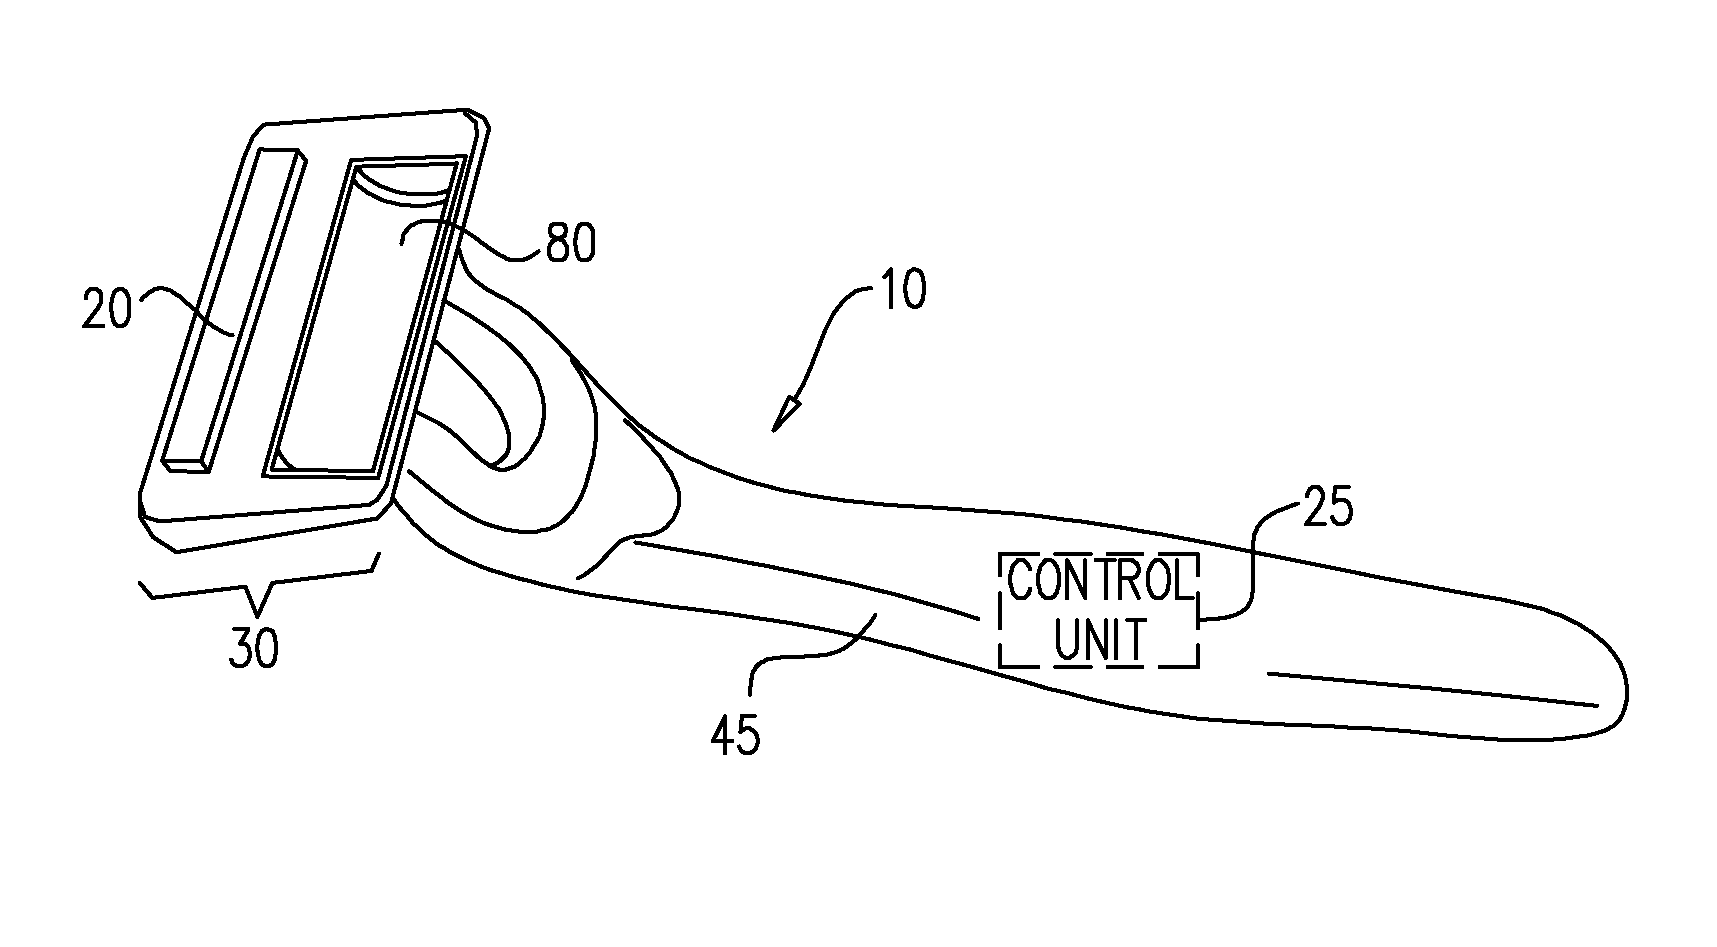 Ultrasonic skin treatment device with hair removal capability